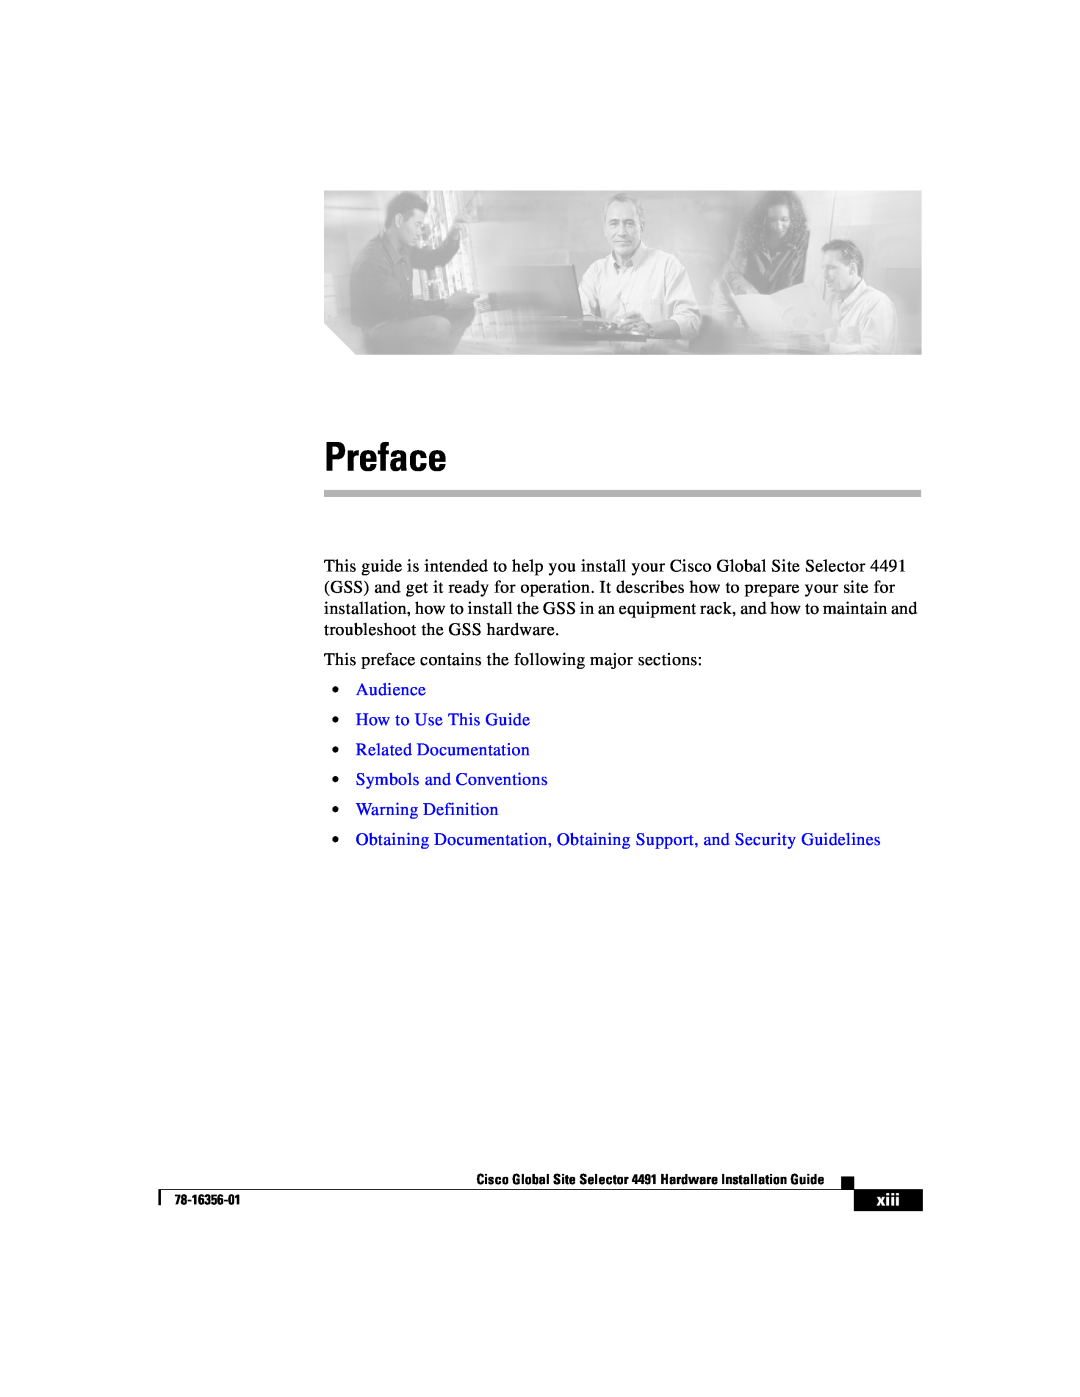 Cisco Systems 78-16356-01 manual Preface, Audience How to Use This Guide Related Documentation, xiii 